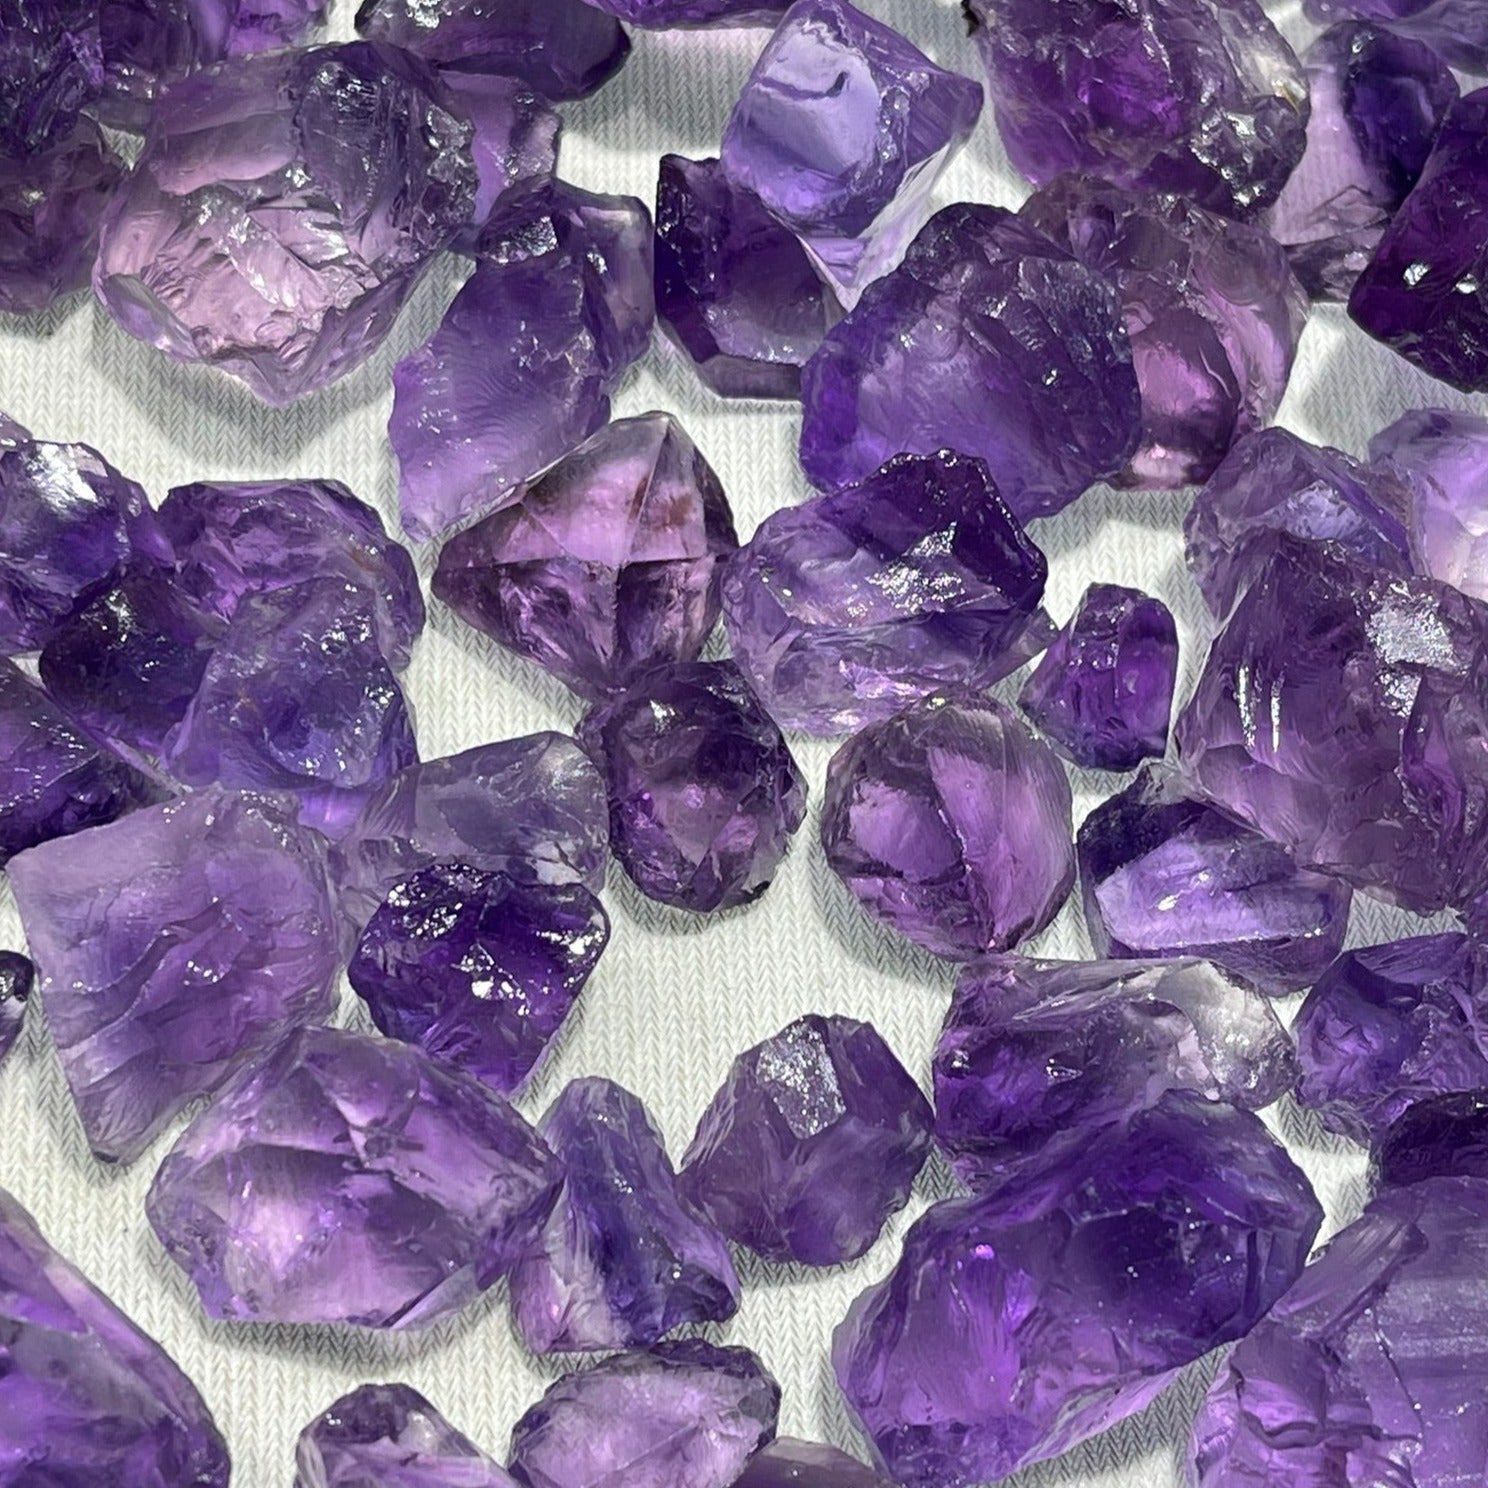 Find Authentic Rough Amethyst Stones for Lapidary Artists - Buy Yours Now!